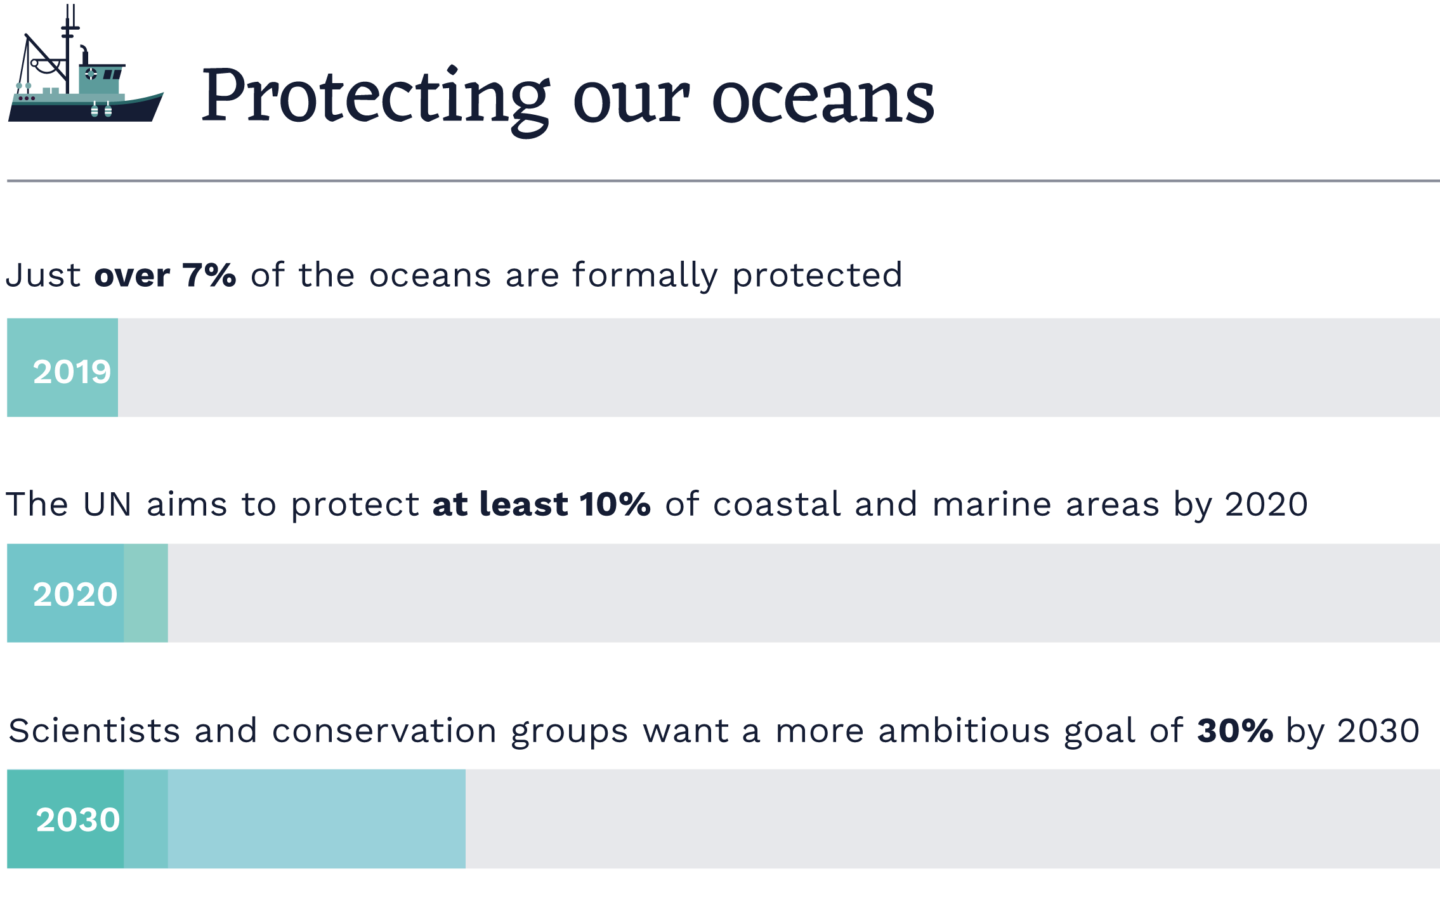 Goals for protecting oceans, marine protection